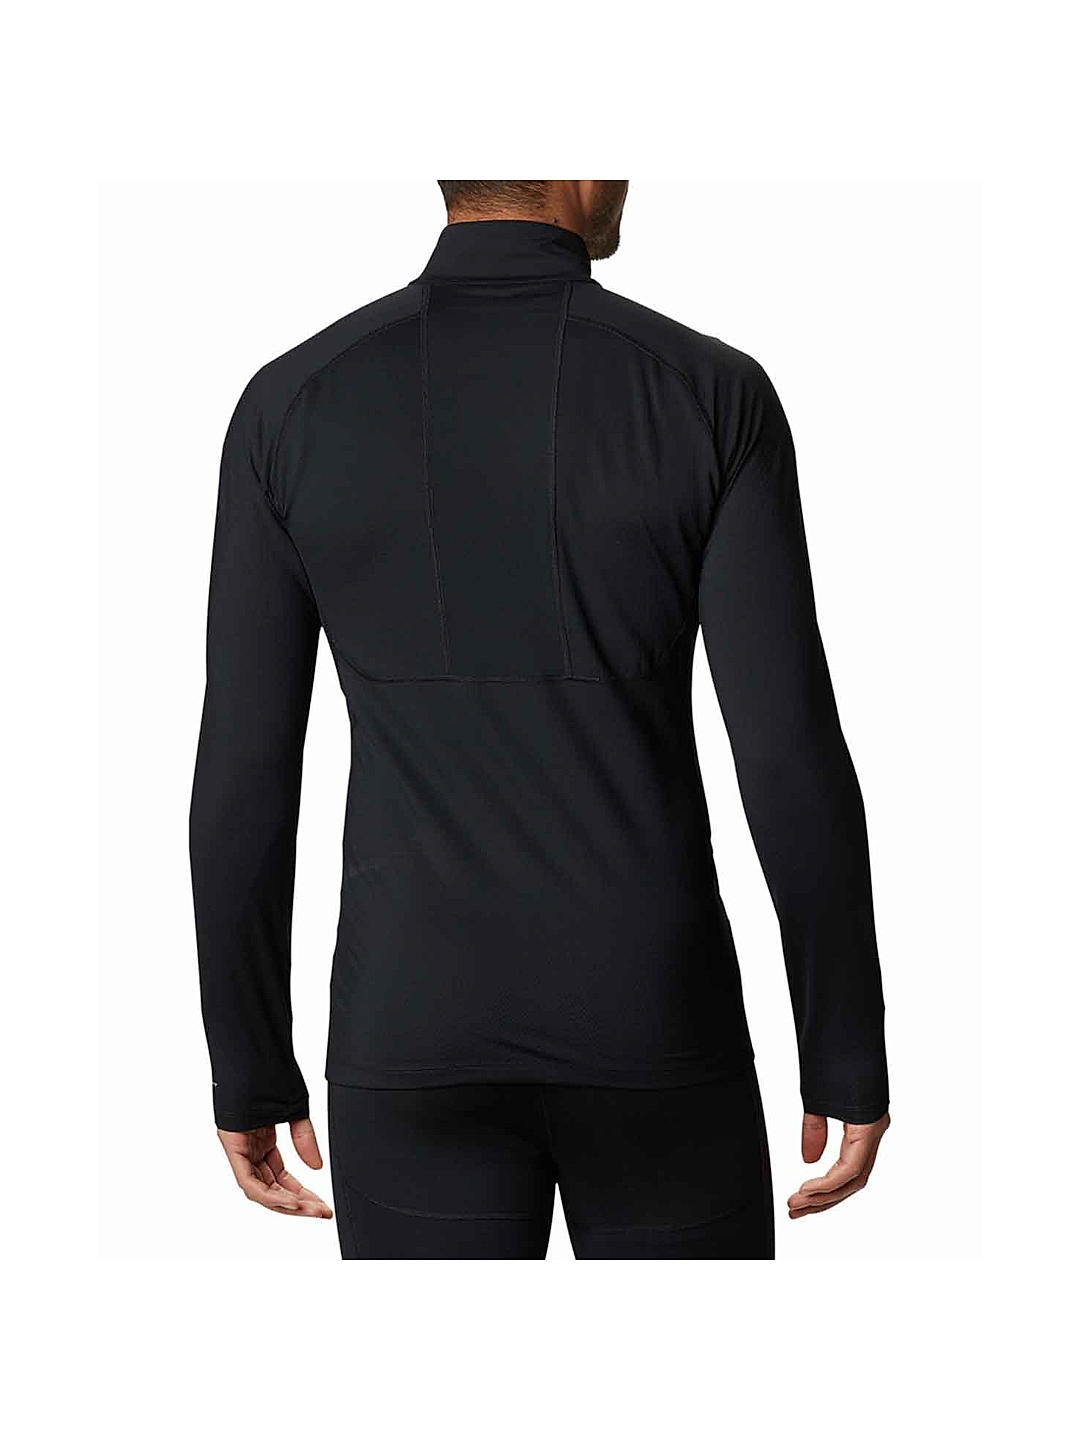 Buy Men's Super Combed Cotton Rich Half Sleeved Thermal Undershirt